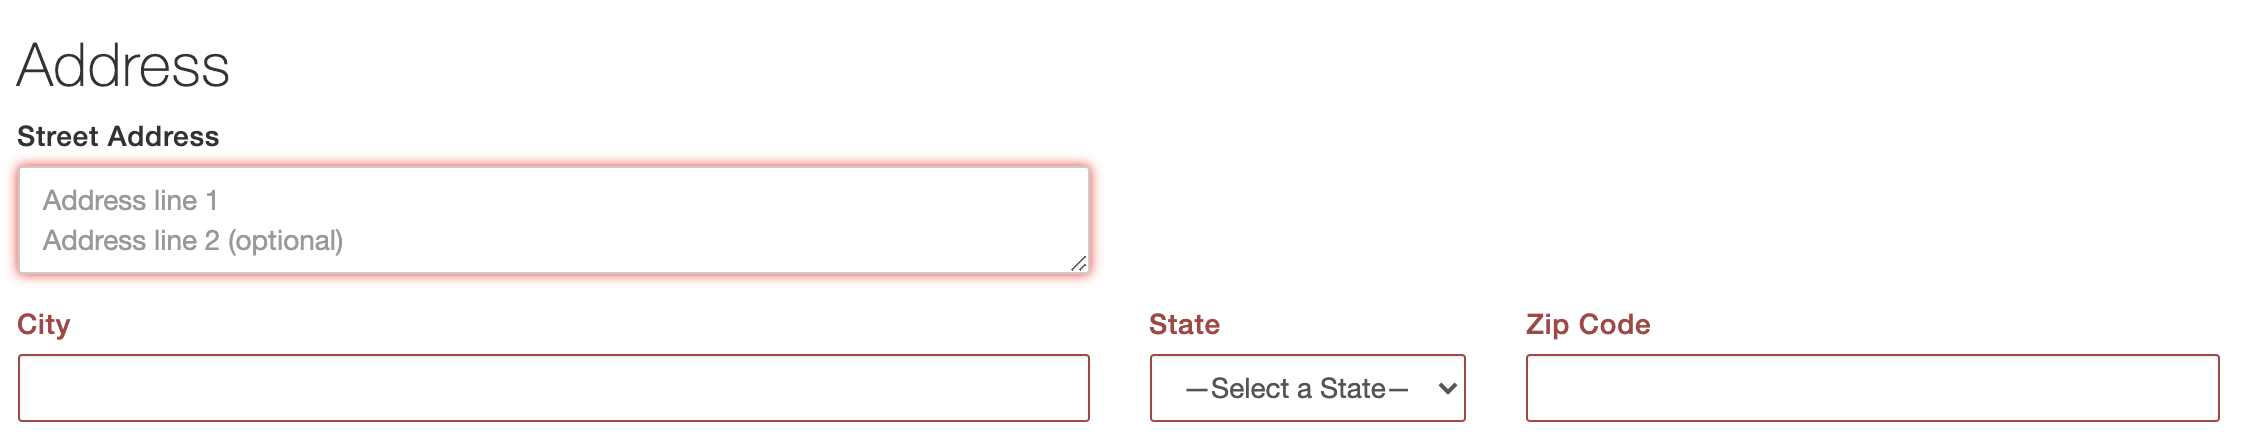 OnPatient_Forms_Required_Fields.png